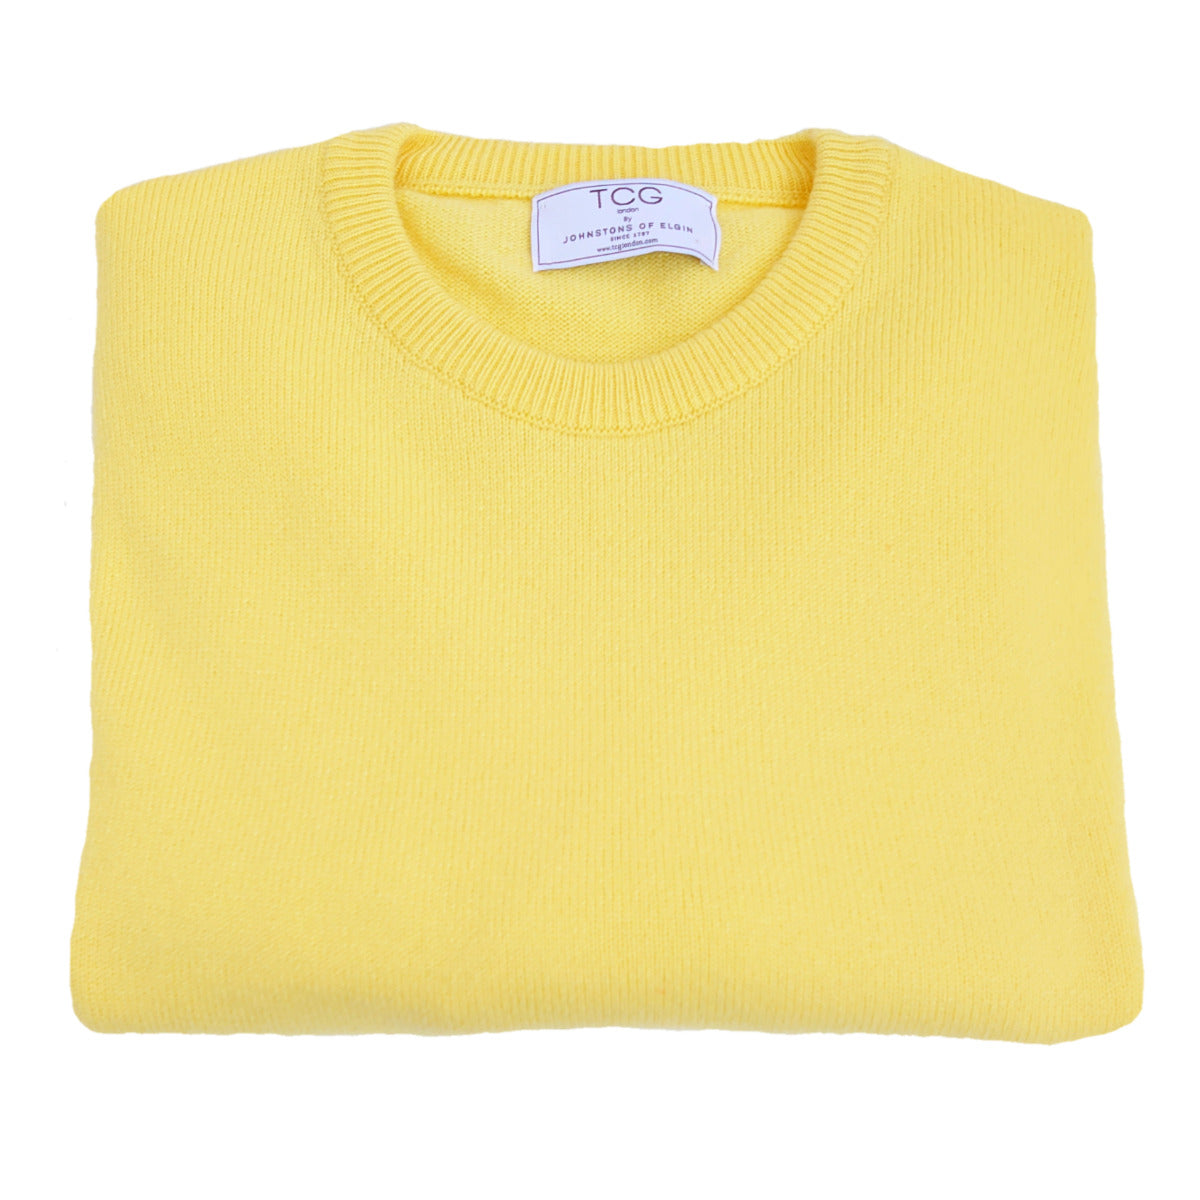 Men's Relaxed Fit Round Neck 100% Pure Cashmere Jumper - Yellow - M